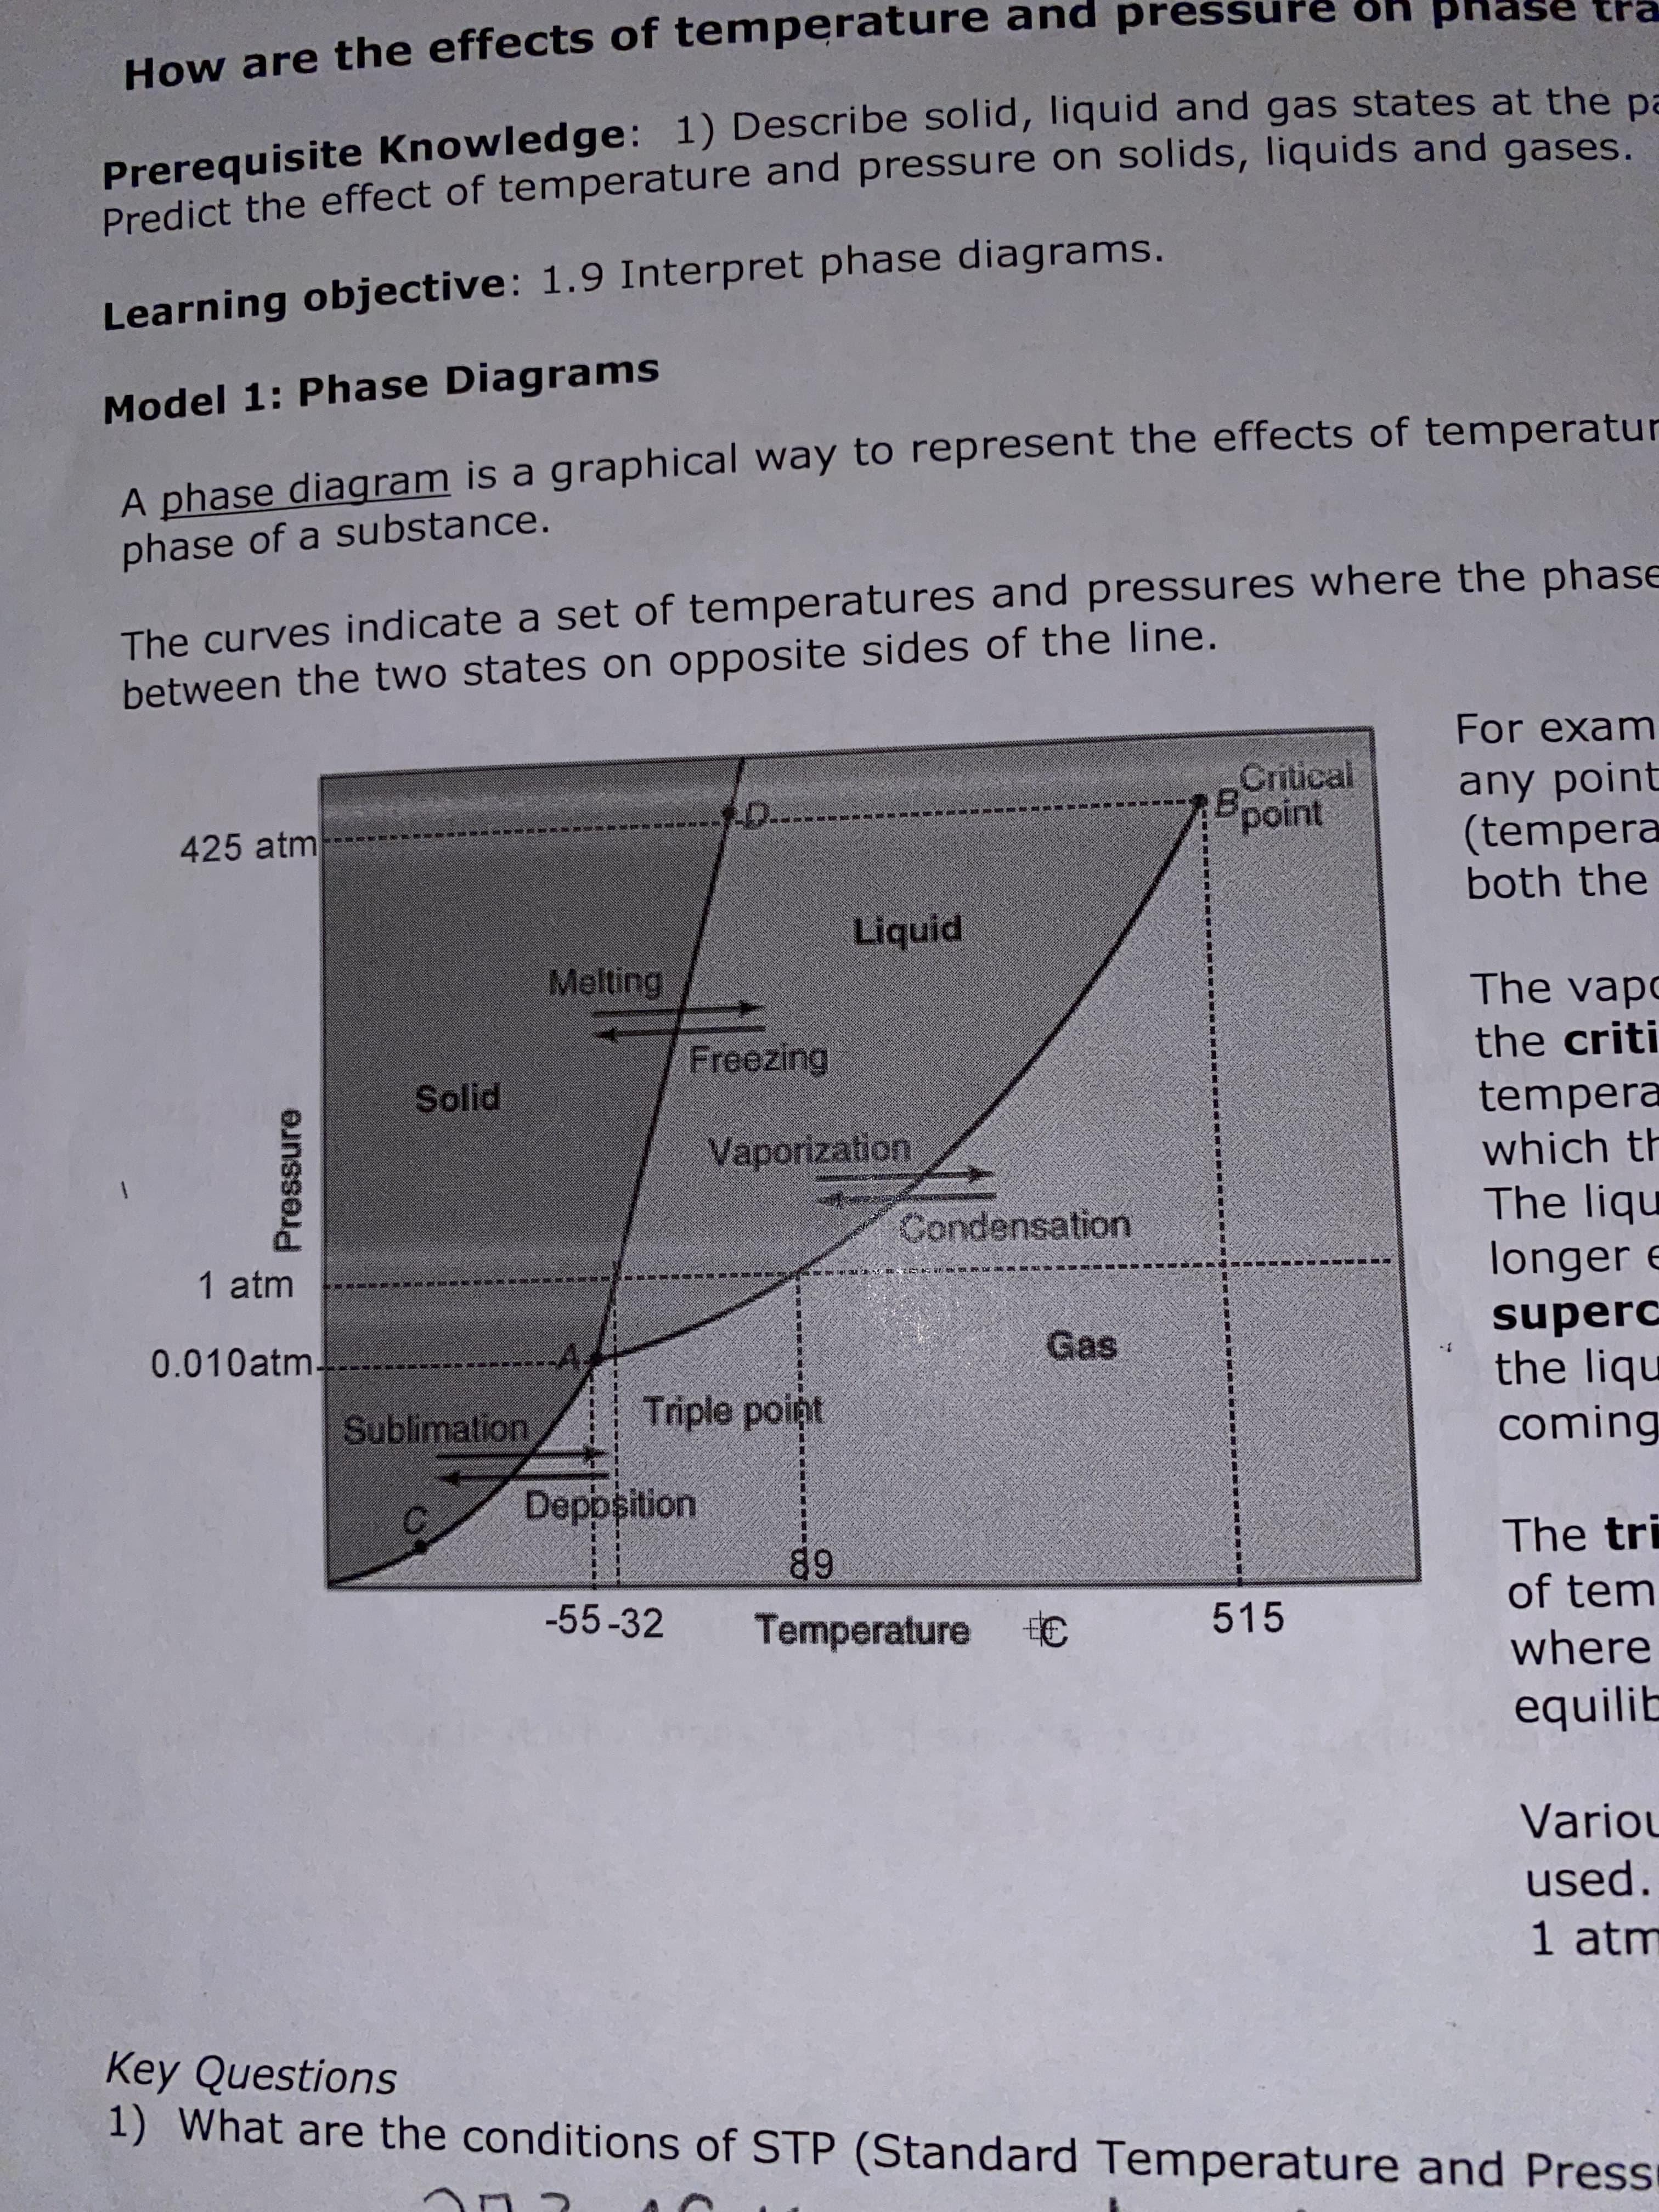 phase
How are the effects of temperature and press
Prerequisite Knowledge: 1) Describe solid, liquid and gas states at the pa
Predict the effect of temperature and pressure on solids, liquids and gases.
Learning objective: 1.9 Interpret phase diagrams.
Model 1: Phase Diagrams
A phase diagram is a graphical way to represent the effects of temperatur
phase of a substance.
The curves indicate a set of temperatures and pressures where the phase
between the two states on opposite sides of the line.
For exam
Critical
Bpoint
any point
(tempera
both the
D..
425 atm
Liquid
Melting
The vapo
the criti
Freezing
tempera
which th
The liqu
longer e
Solid
Vaporization
Condensation
1 atm
superc
the liqu
coming
Gas
A,
0.010atm.
Triple point
Sublimation
Deposition
The tri
89
of tem
-55-32
515
Temperature C
where
equilib
Variou
used.
1 atm
Key Questions
1) What are the conditions of STP (Standard Temperature and Press
Pressure
